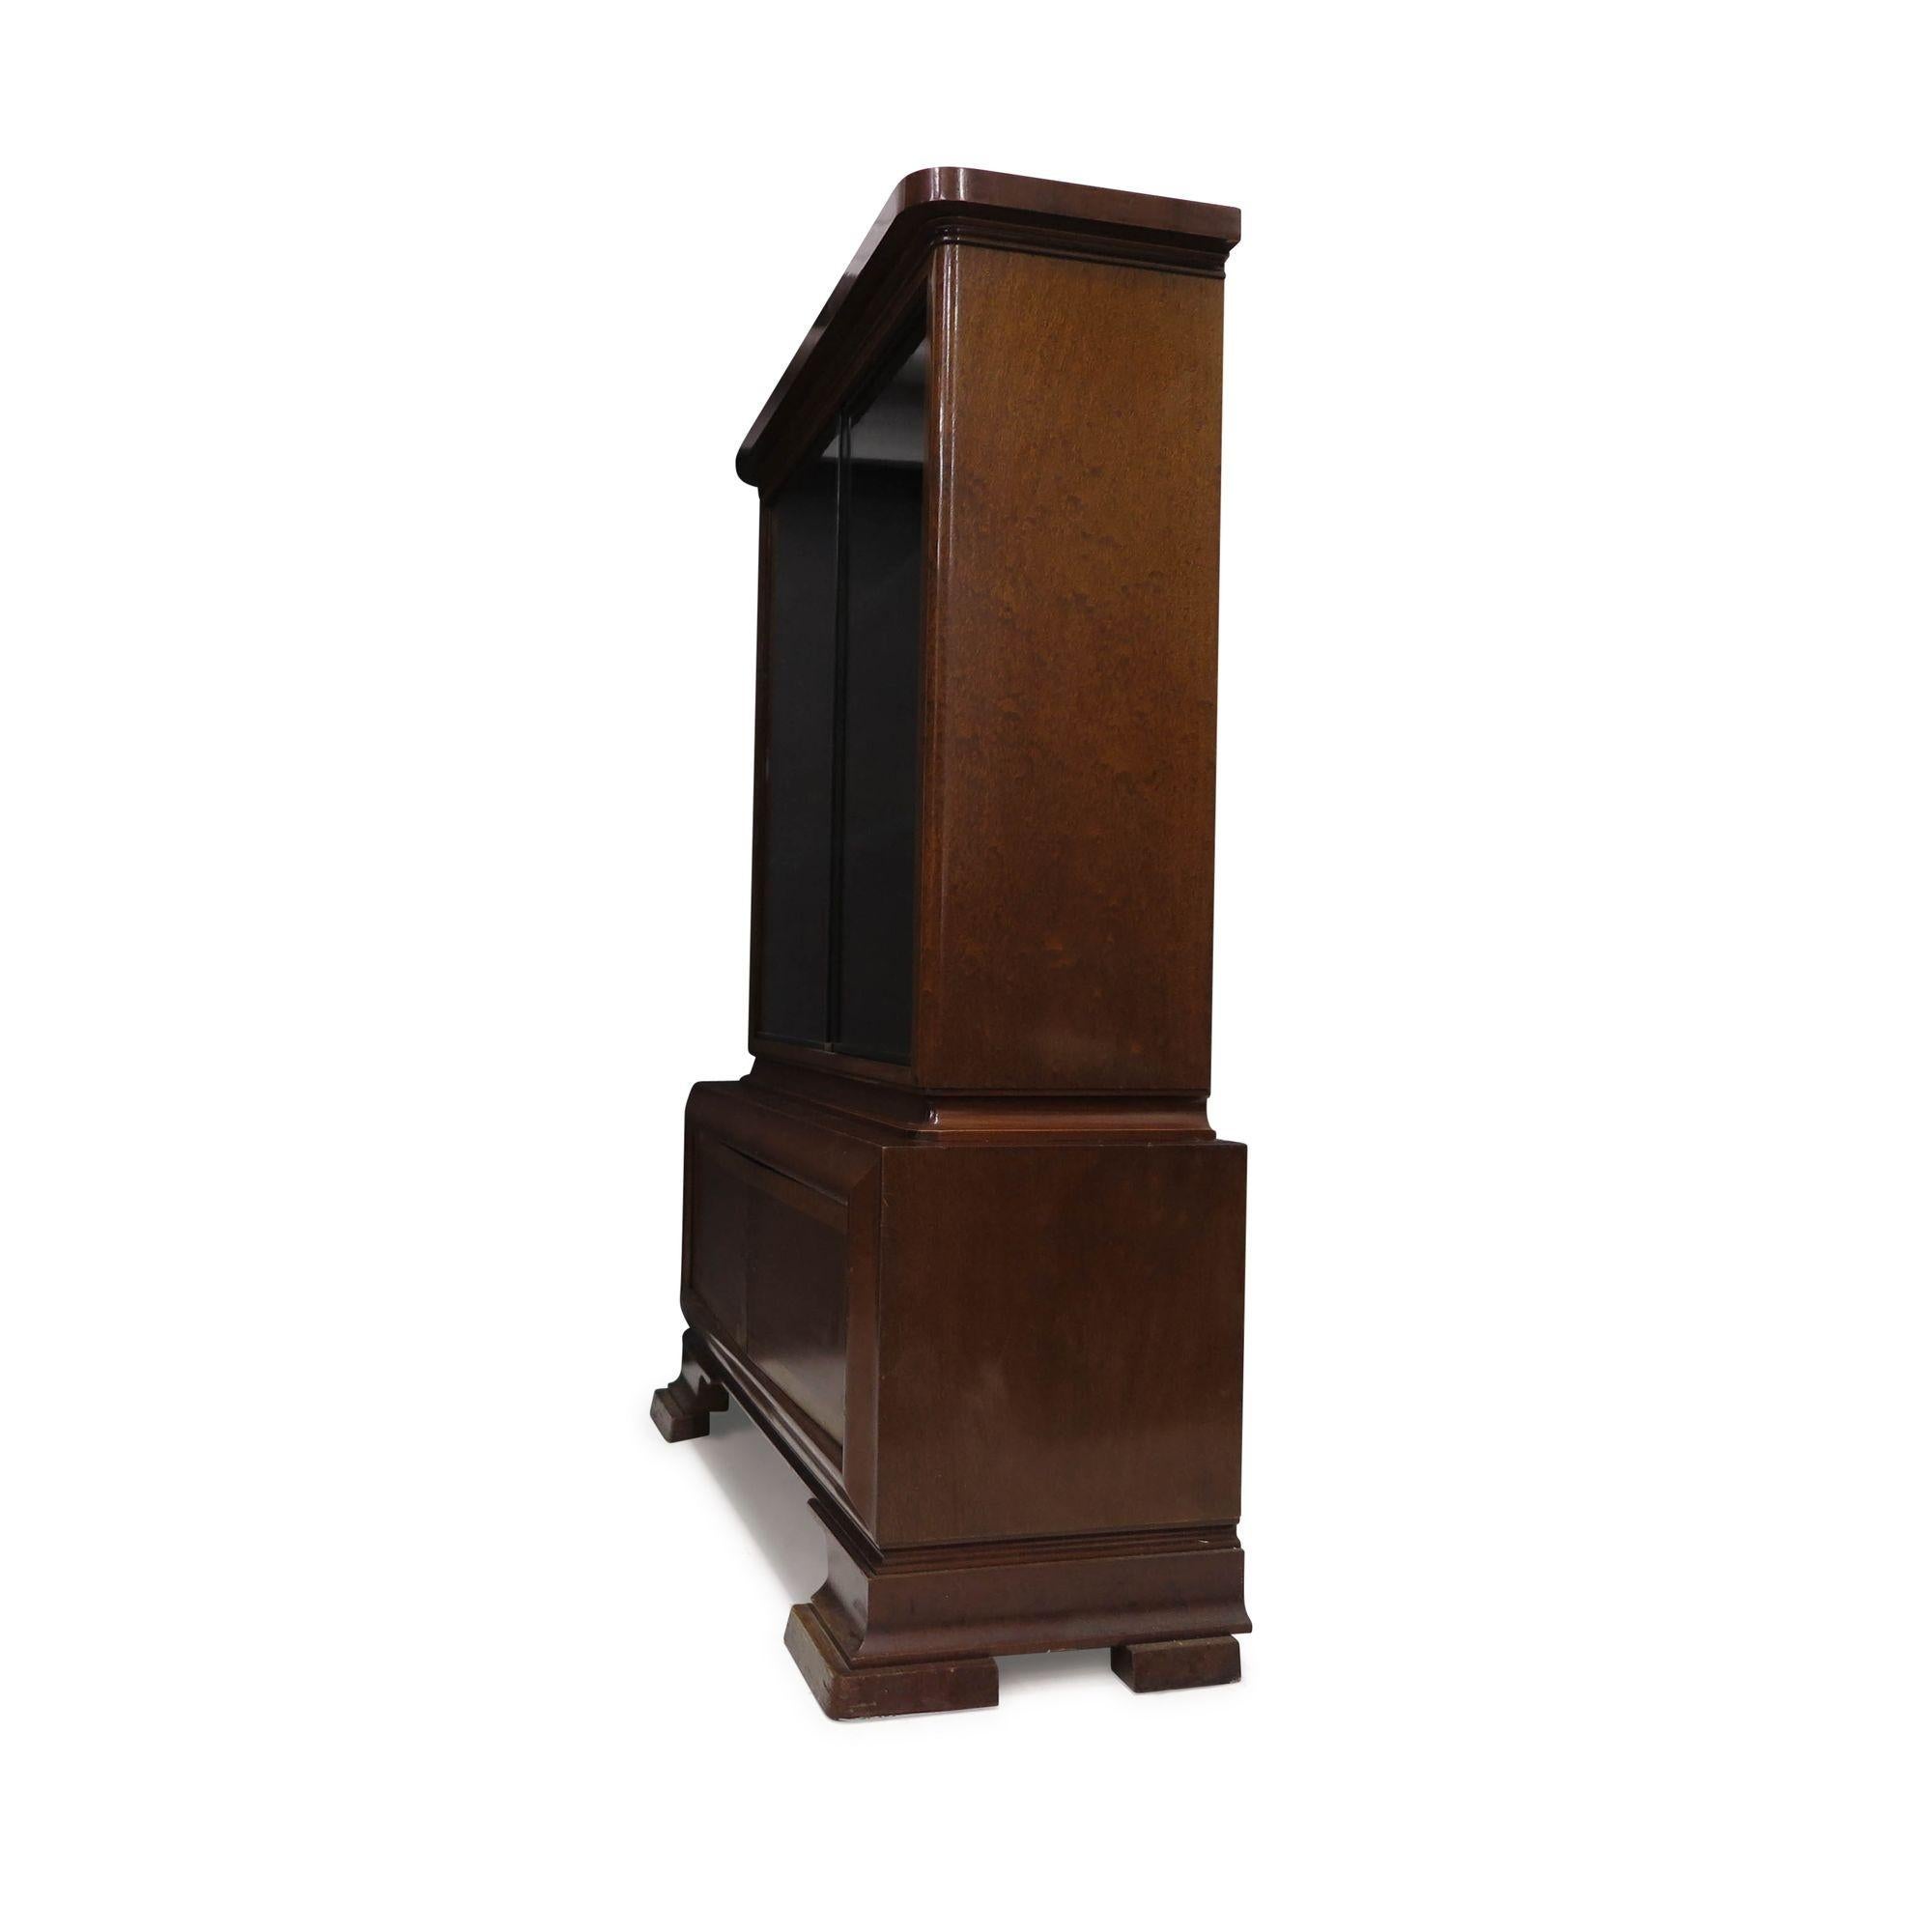 1930s German Art Deco Cabinet crafted from walnut, featuring a pair of sliding glass doors and adjustable shelves, above a cabinet with locking doors. The piece retains its original finish and is in good condition with age-appropriate